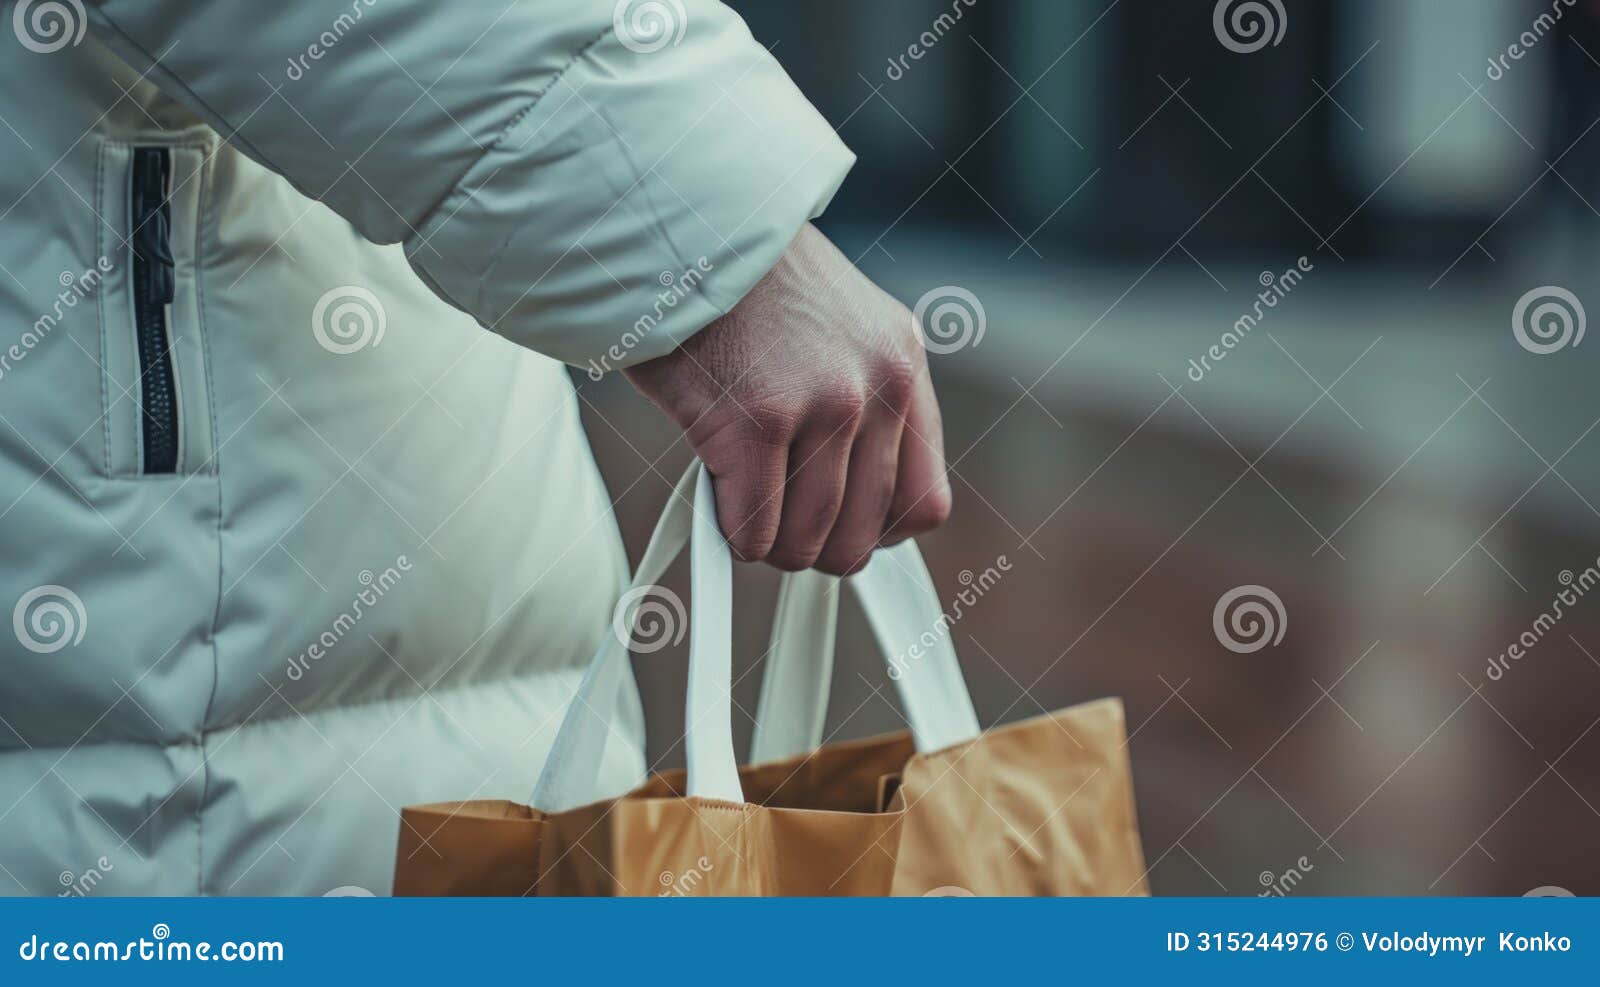 person in white coat holding brown bag, practical and professional image